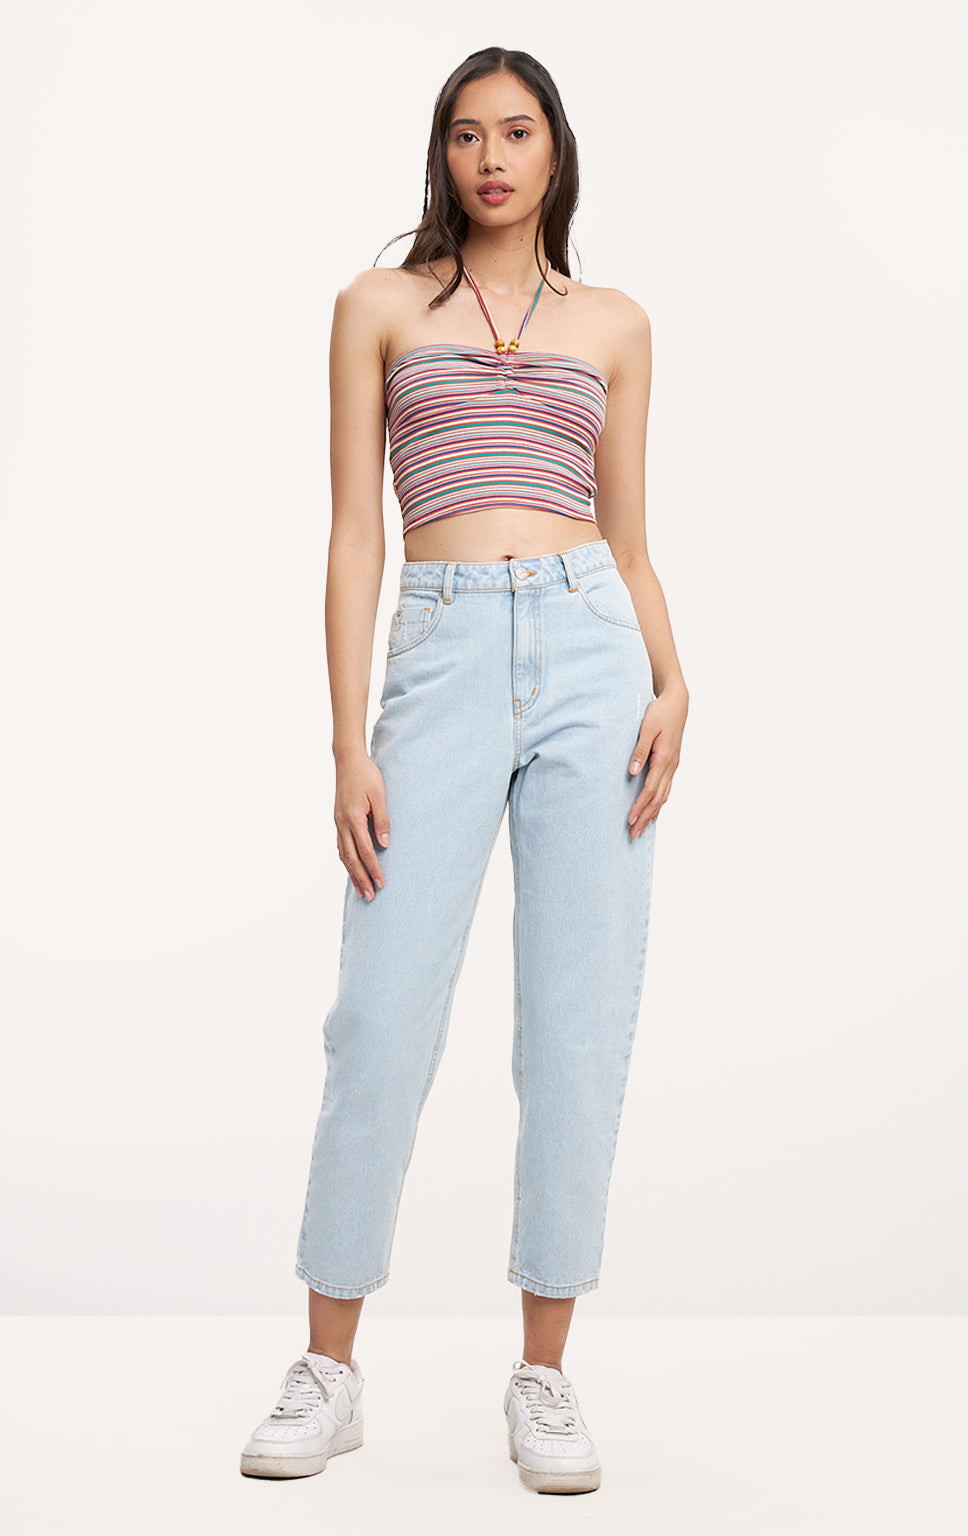 STRIPED HALTER TOP WITH BEADED STRAPS